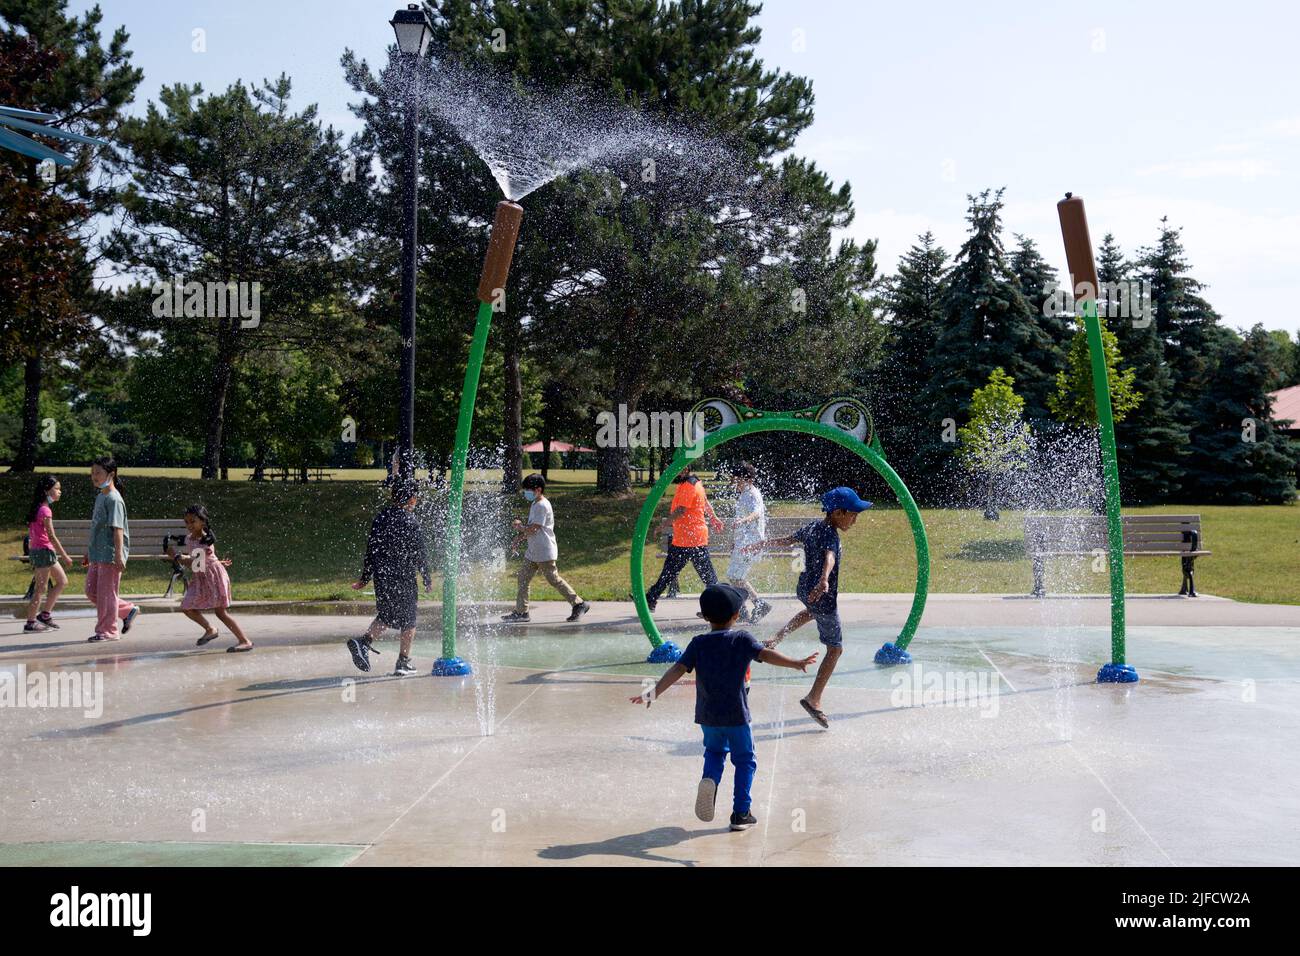 Toronto, Ontario / Canada - 06/30/2022: Children bathing in a refreshing spray of the city fountain on a hot summer day. Children playing in spray par Stock Photo